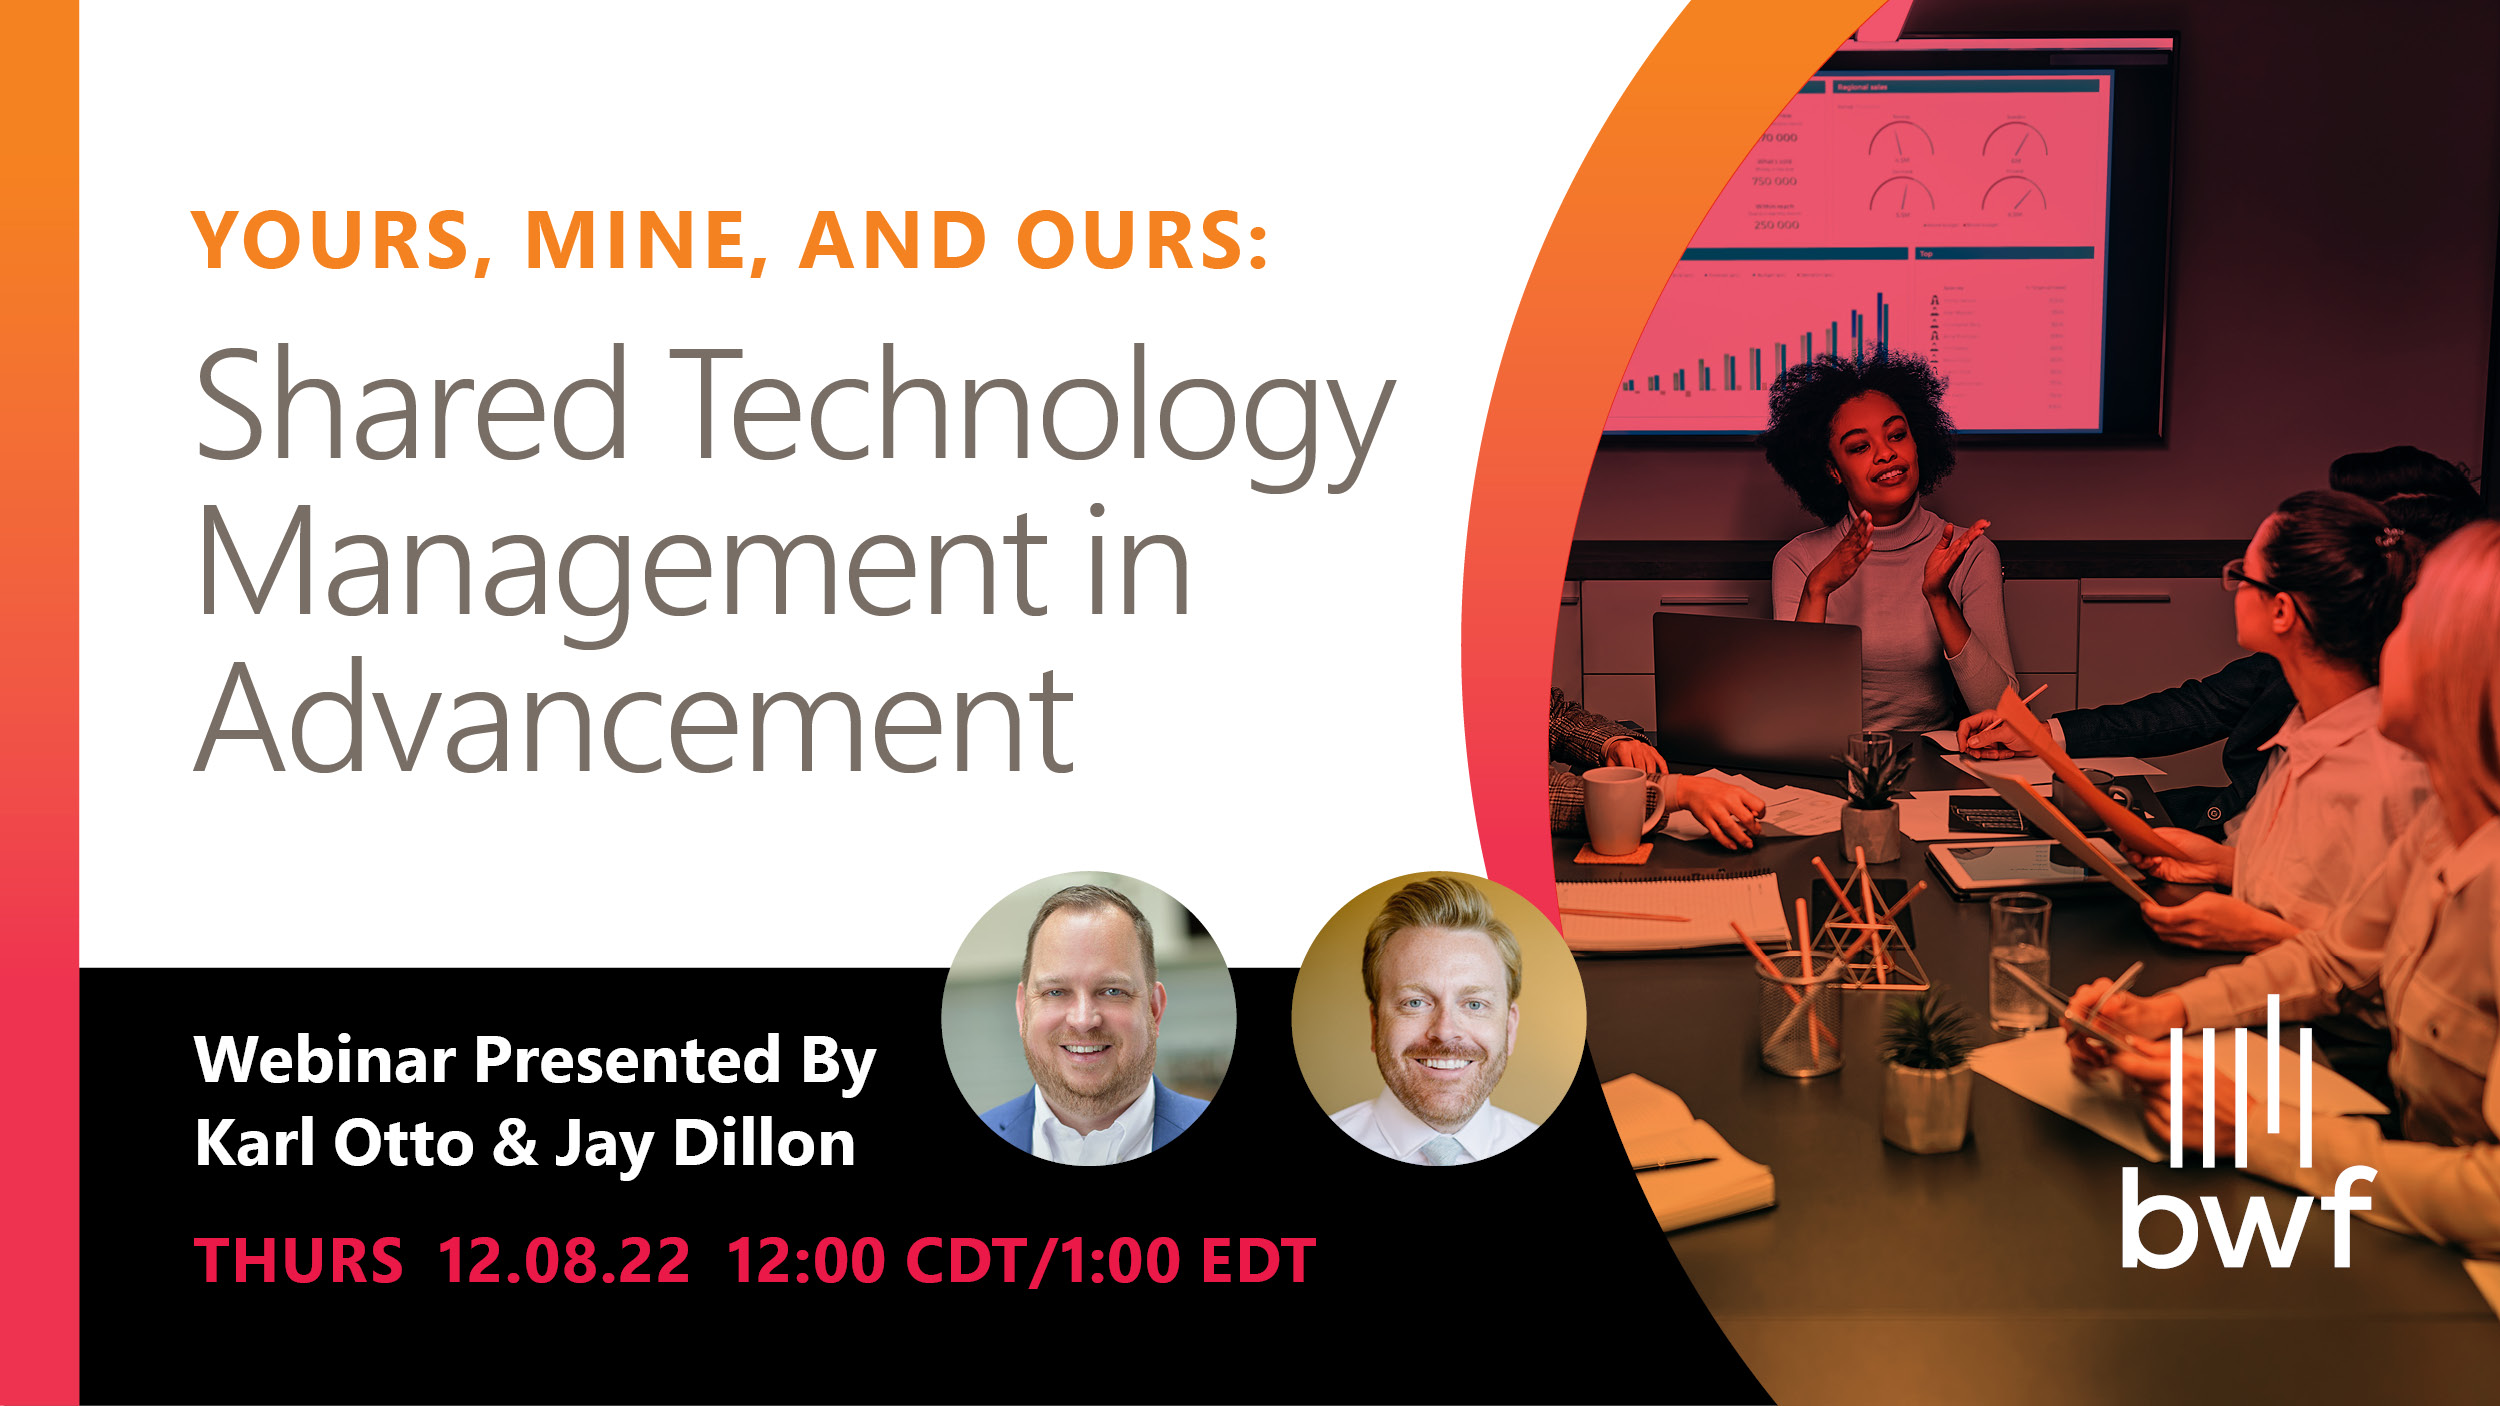 Yours, Mine and Ours: Shared Technology Management in Advancement